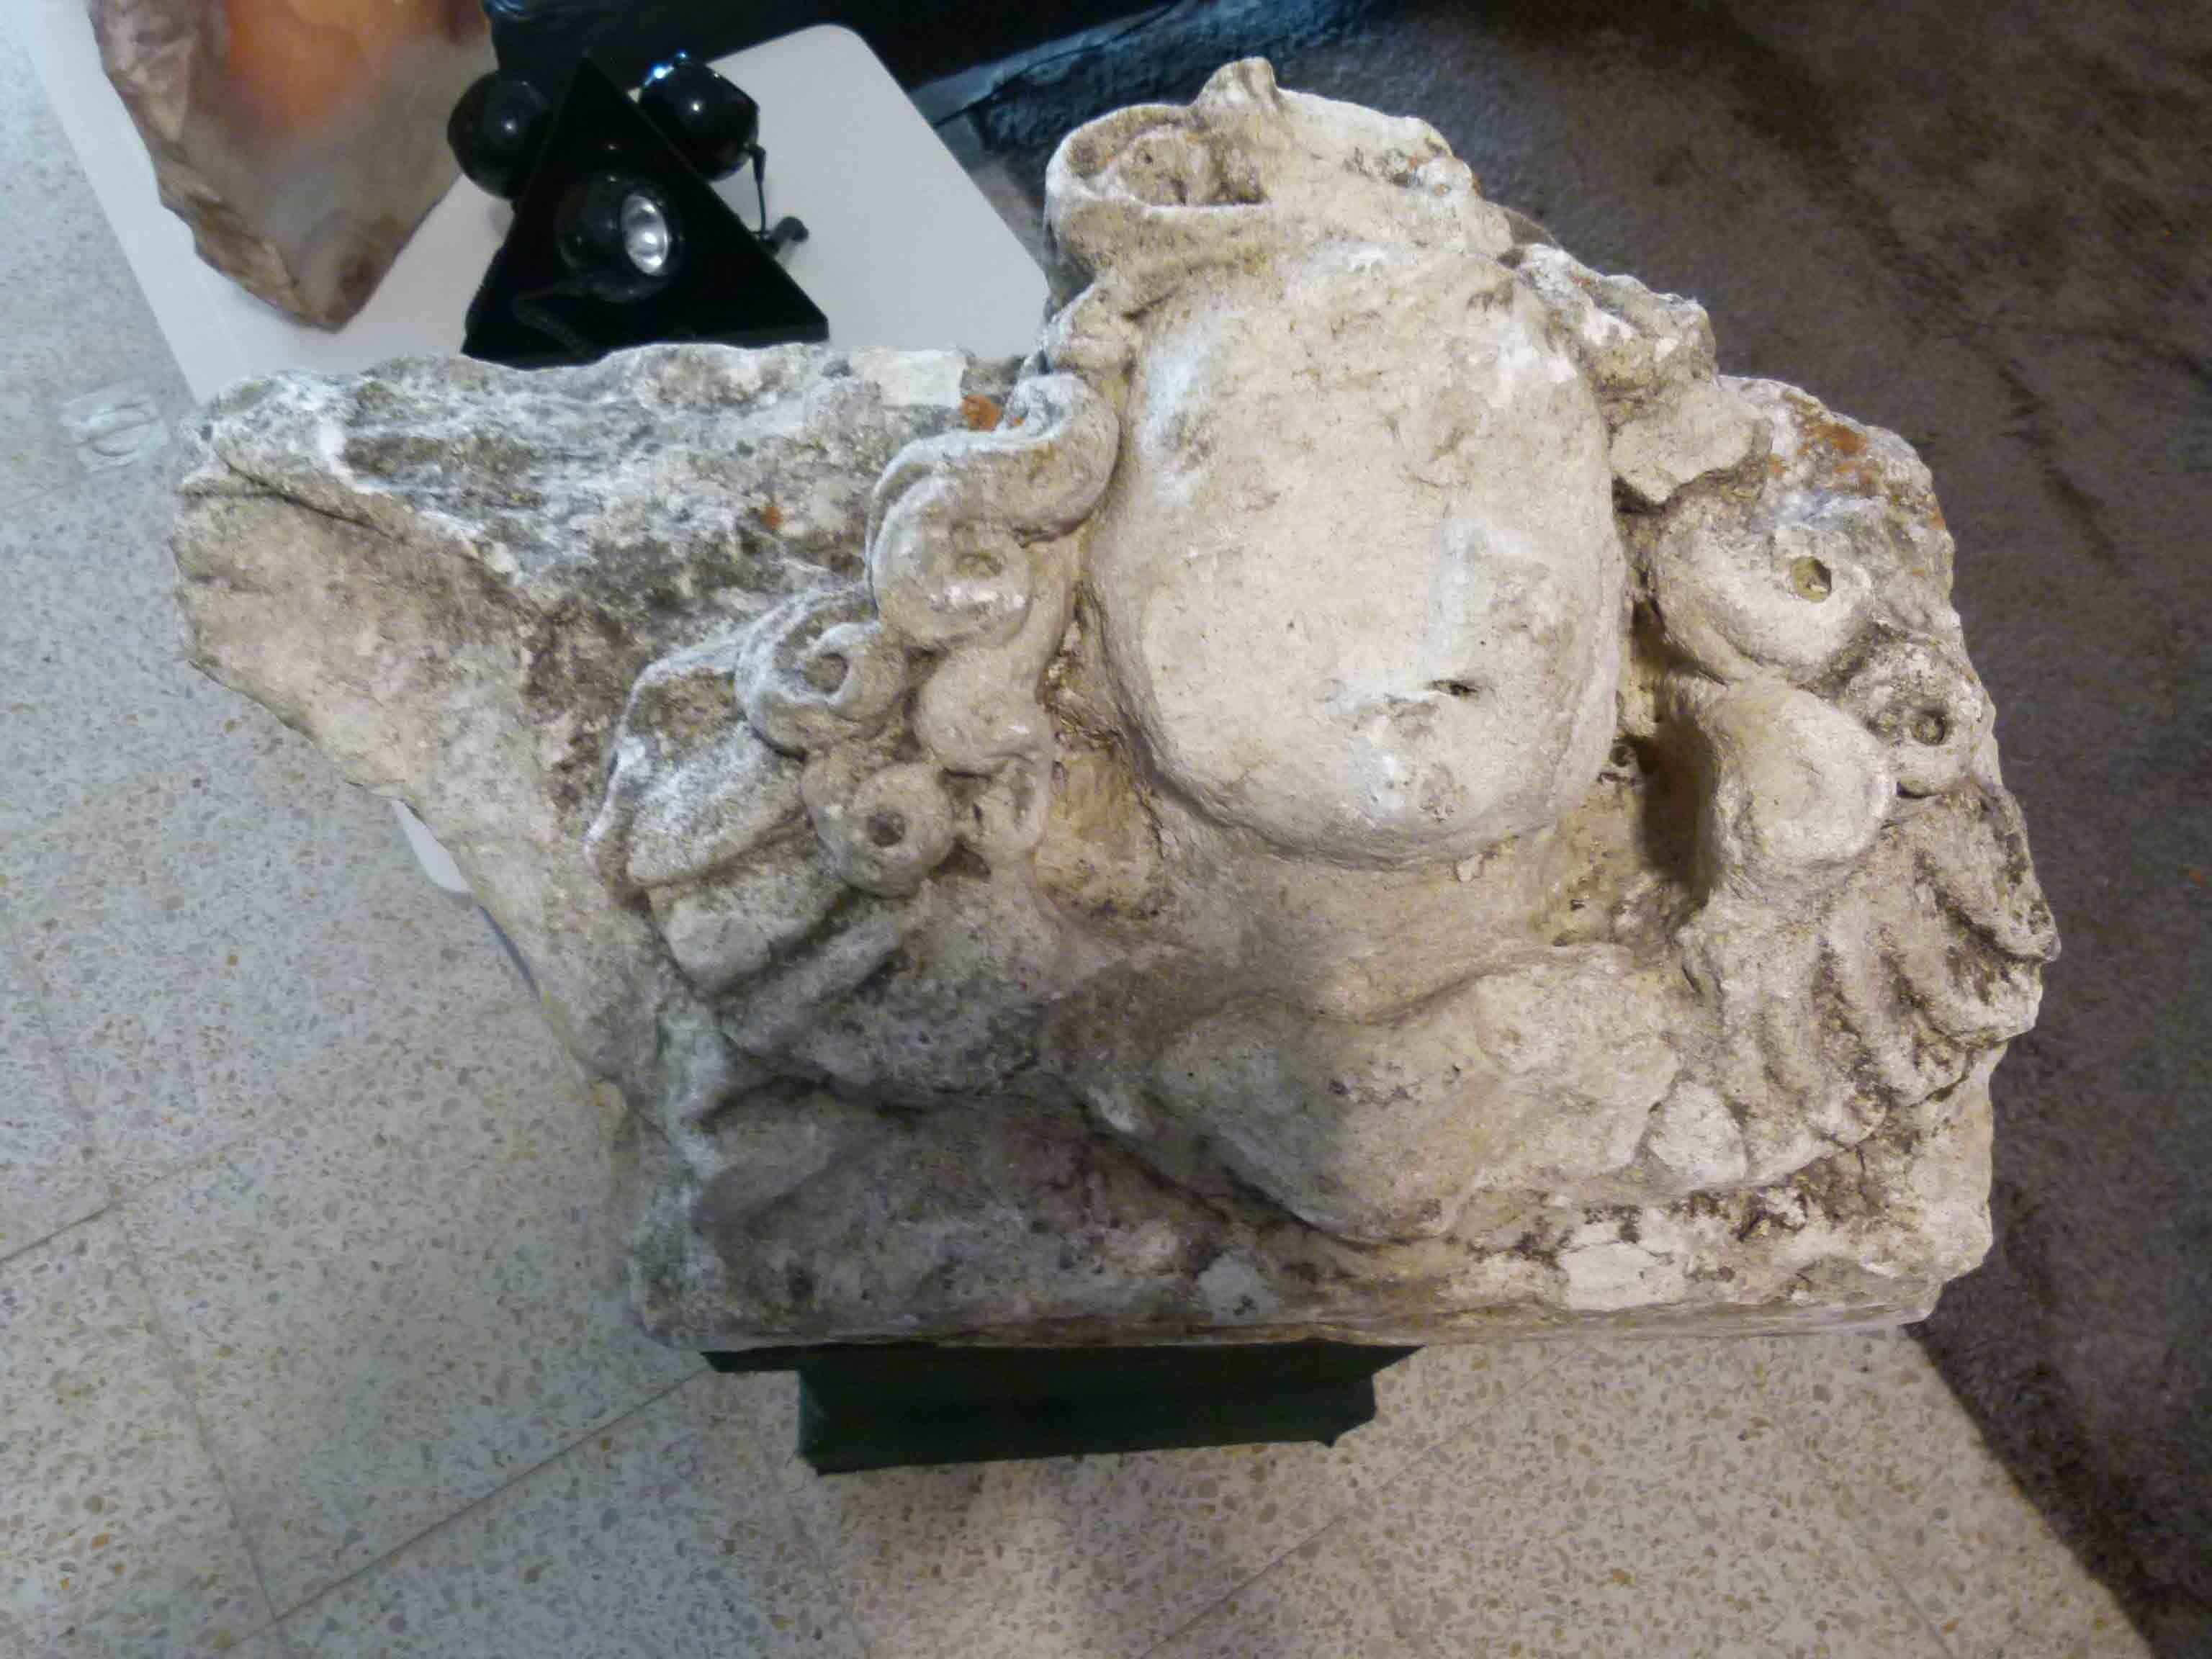 18th century French limestone capital representing the head of a woman. Remains of the physiognomy such as mouth and eyes are still appreciated.

   